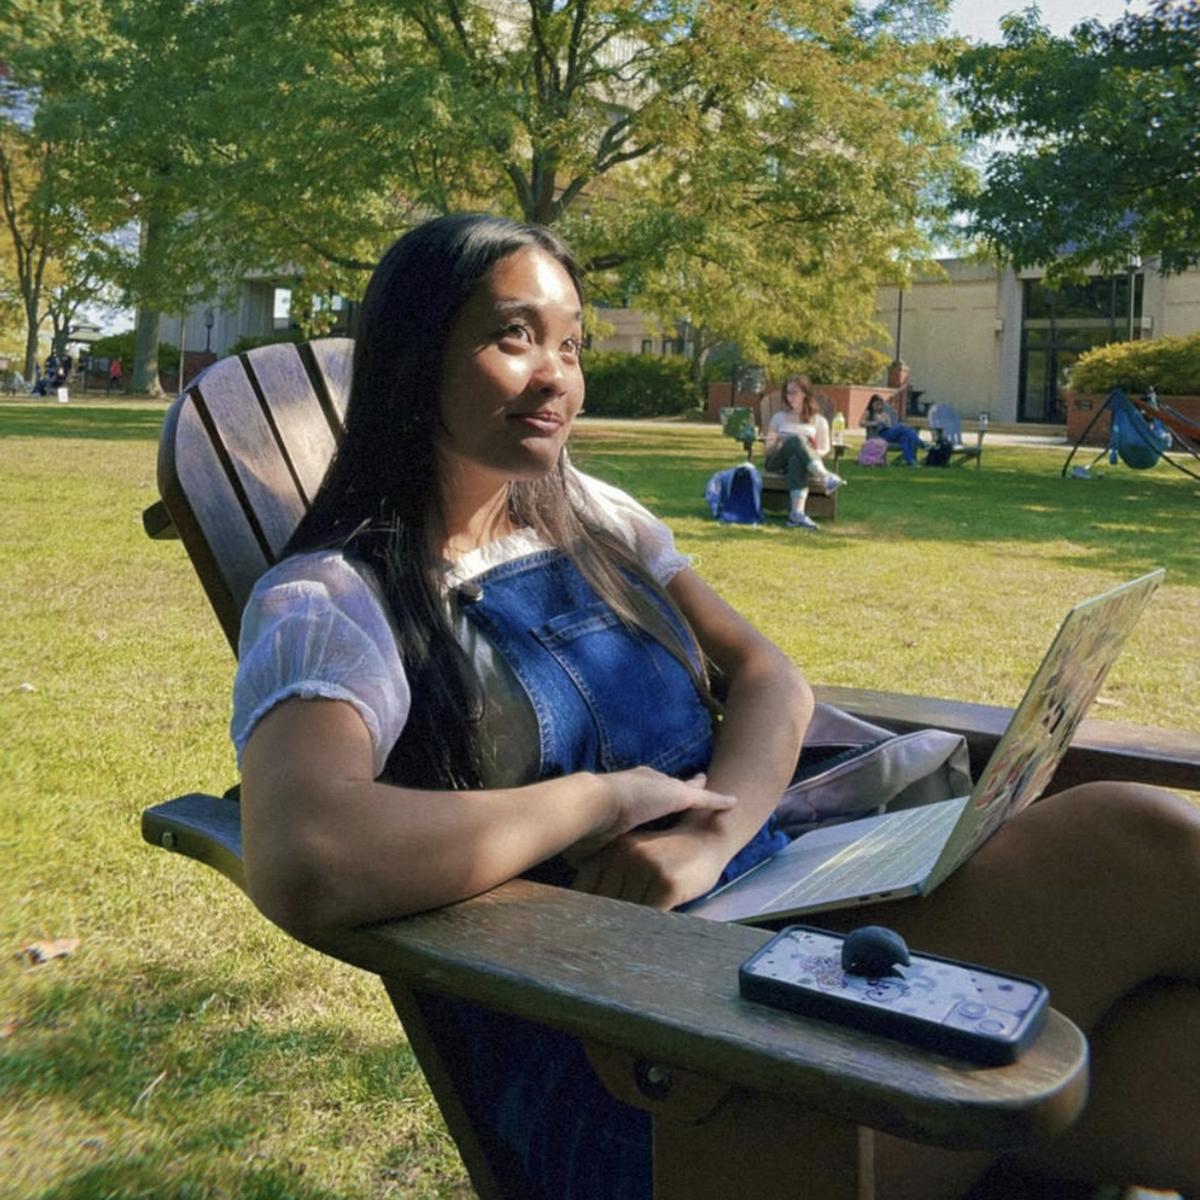 Jolie Phan sits and smiles in an Adirondack chair on 足球外围盘官方网站's quad 